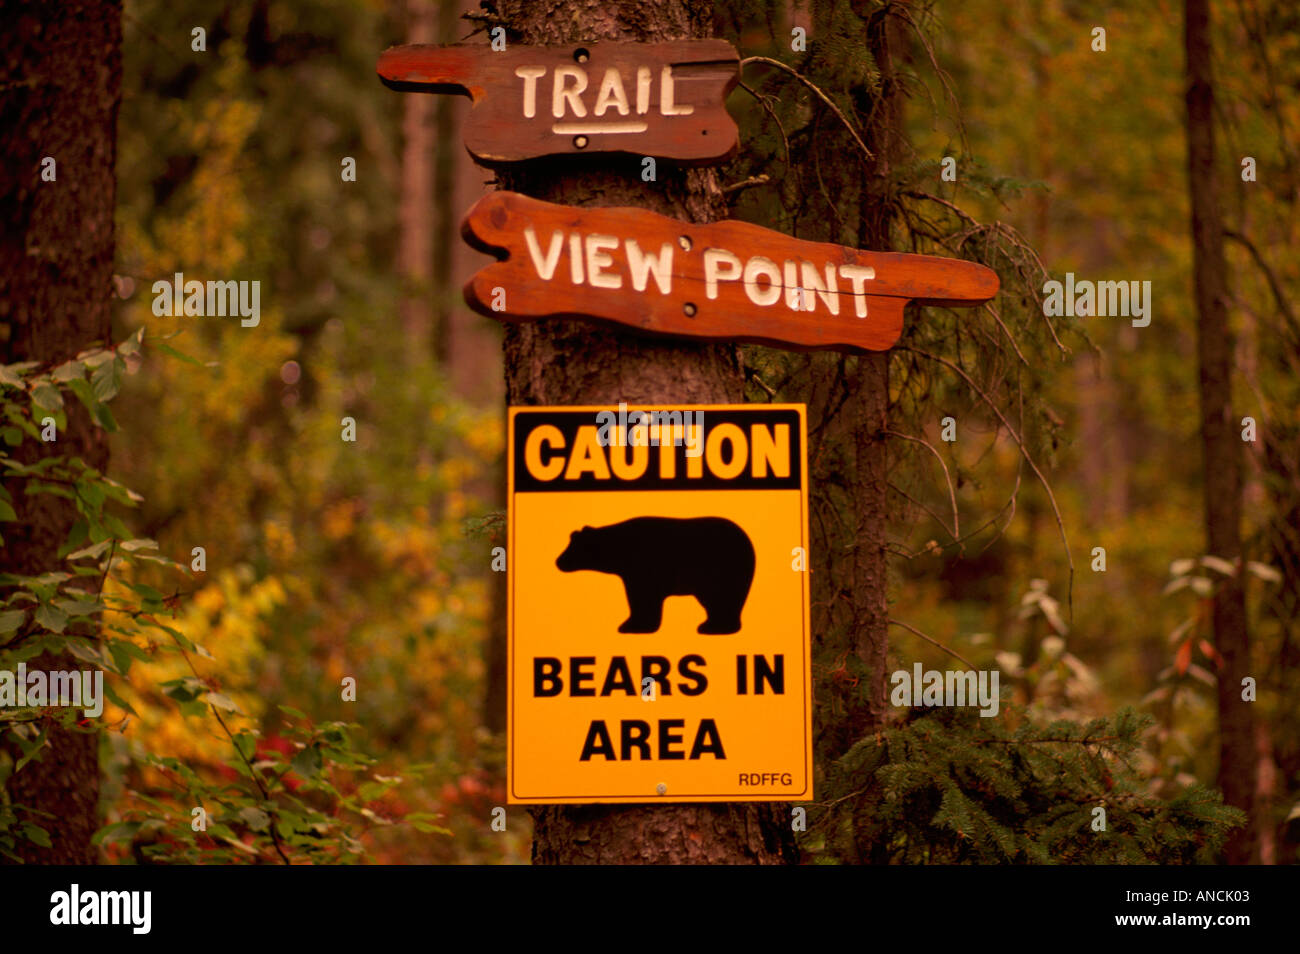 Bear Warning Sign, Caution Signs - Active Bears in Area, Danger Alert, Public Notice on a Hiking Trail Stock Photo